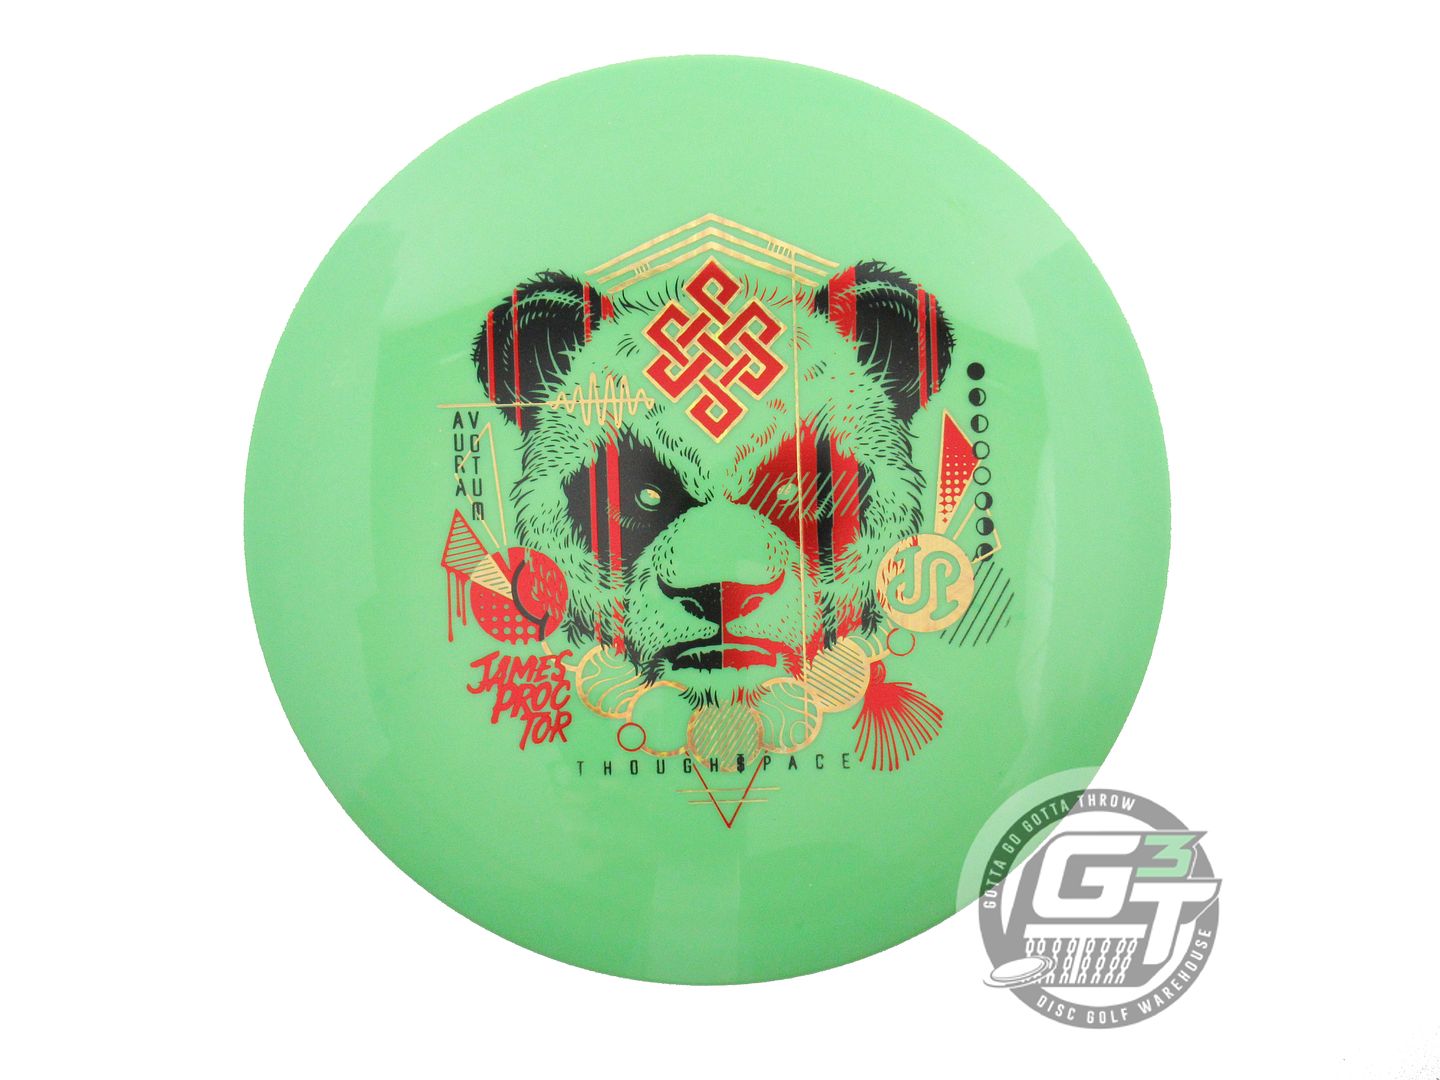 Thought Space Athletics Limited Edition 2023 Signature Series James Proctor Aura Votum Fairway Driver Golf Disc (Individually Listed)